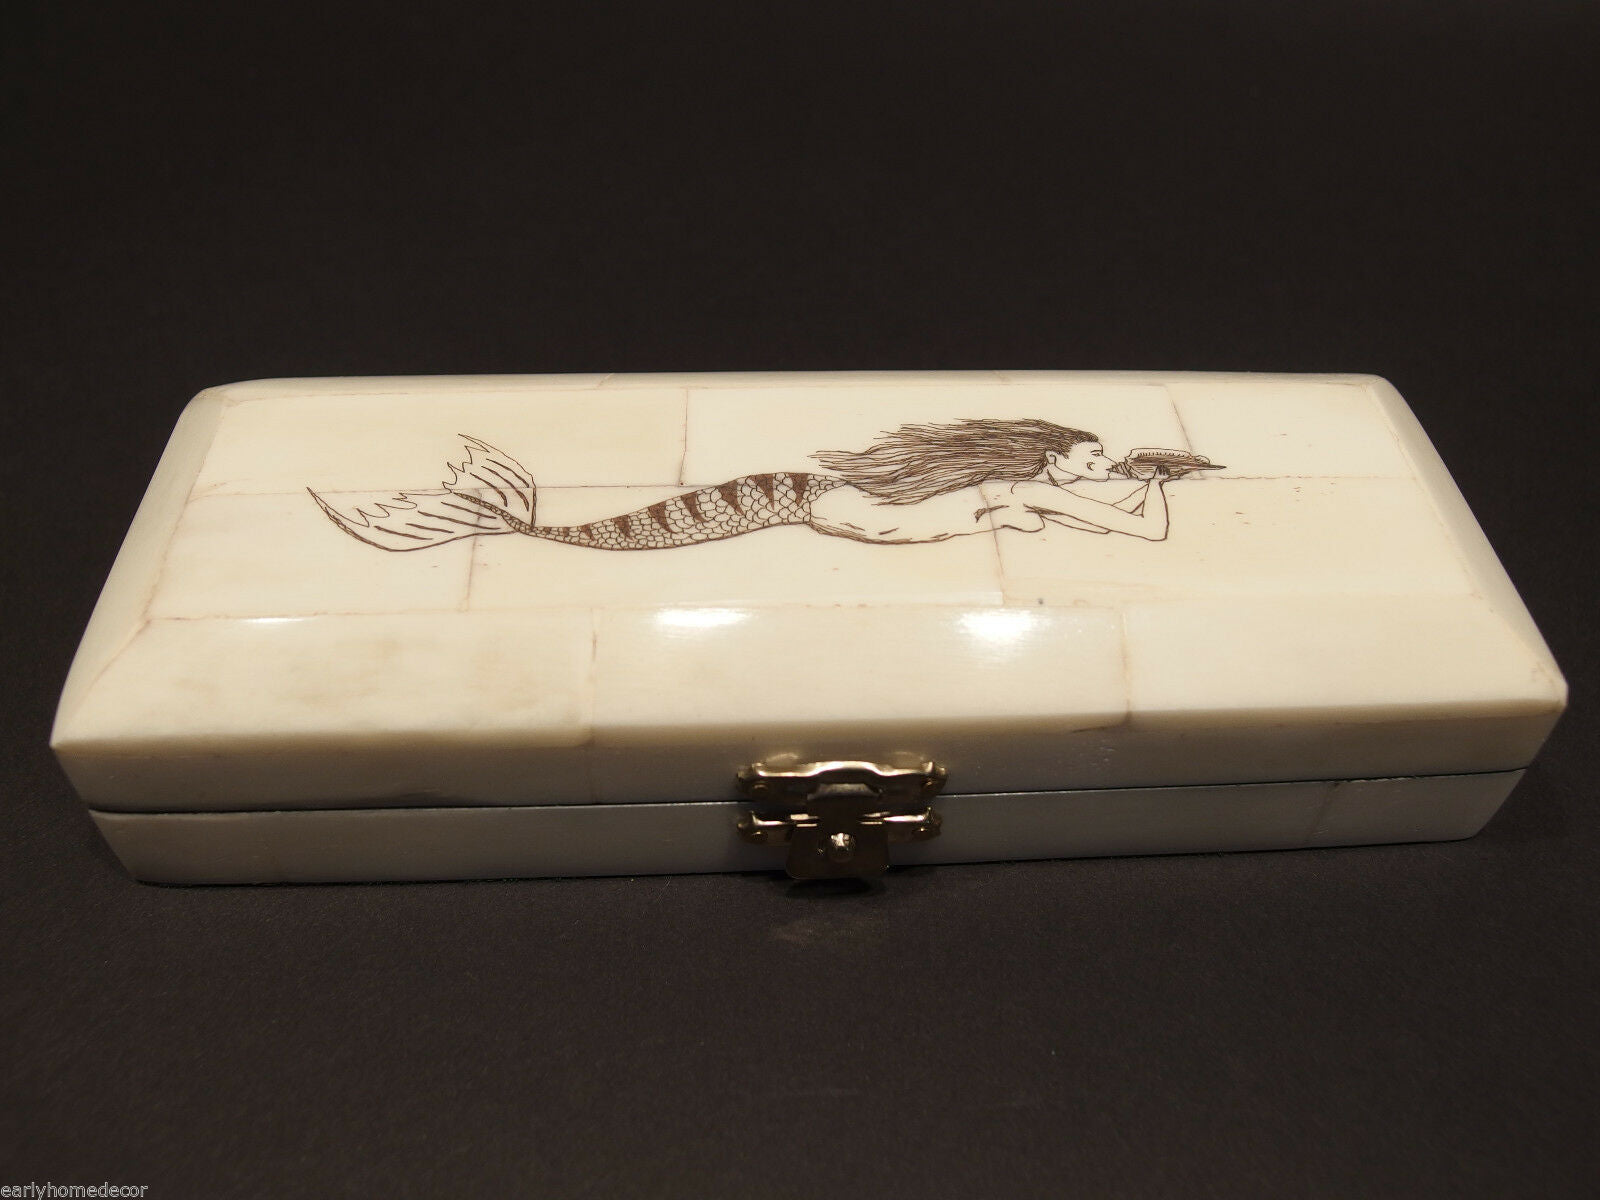 Antique Style Mermaid Scrimshaw Etched Bone & Wood Trinket Stamp Jewelry Box - Early Home Decor